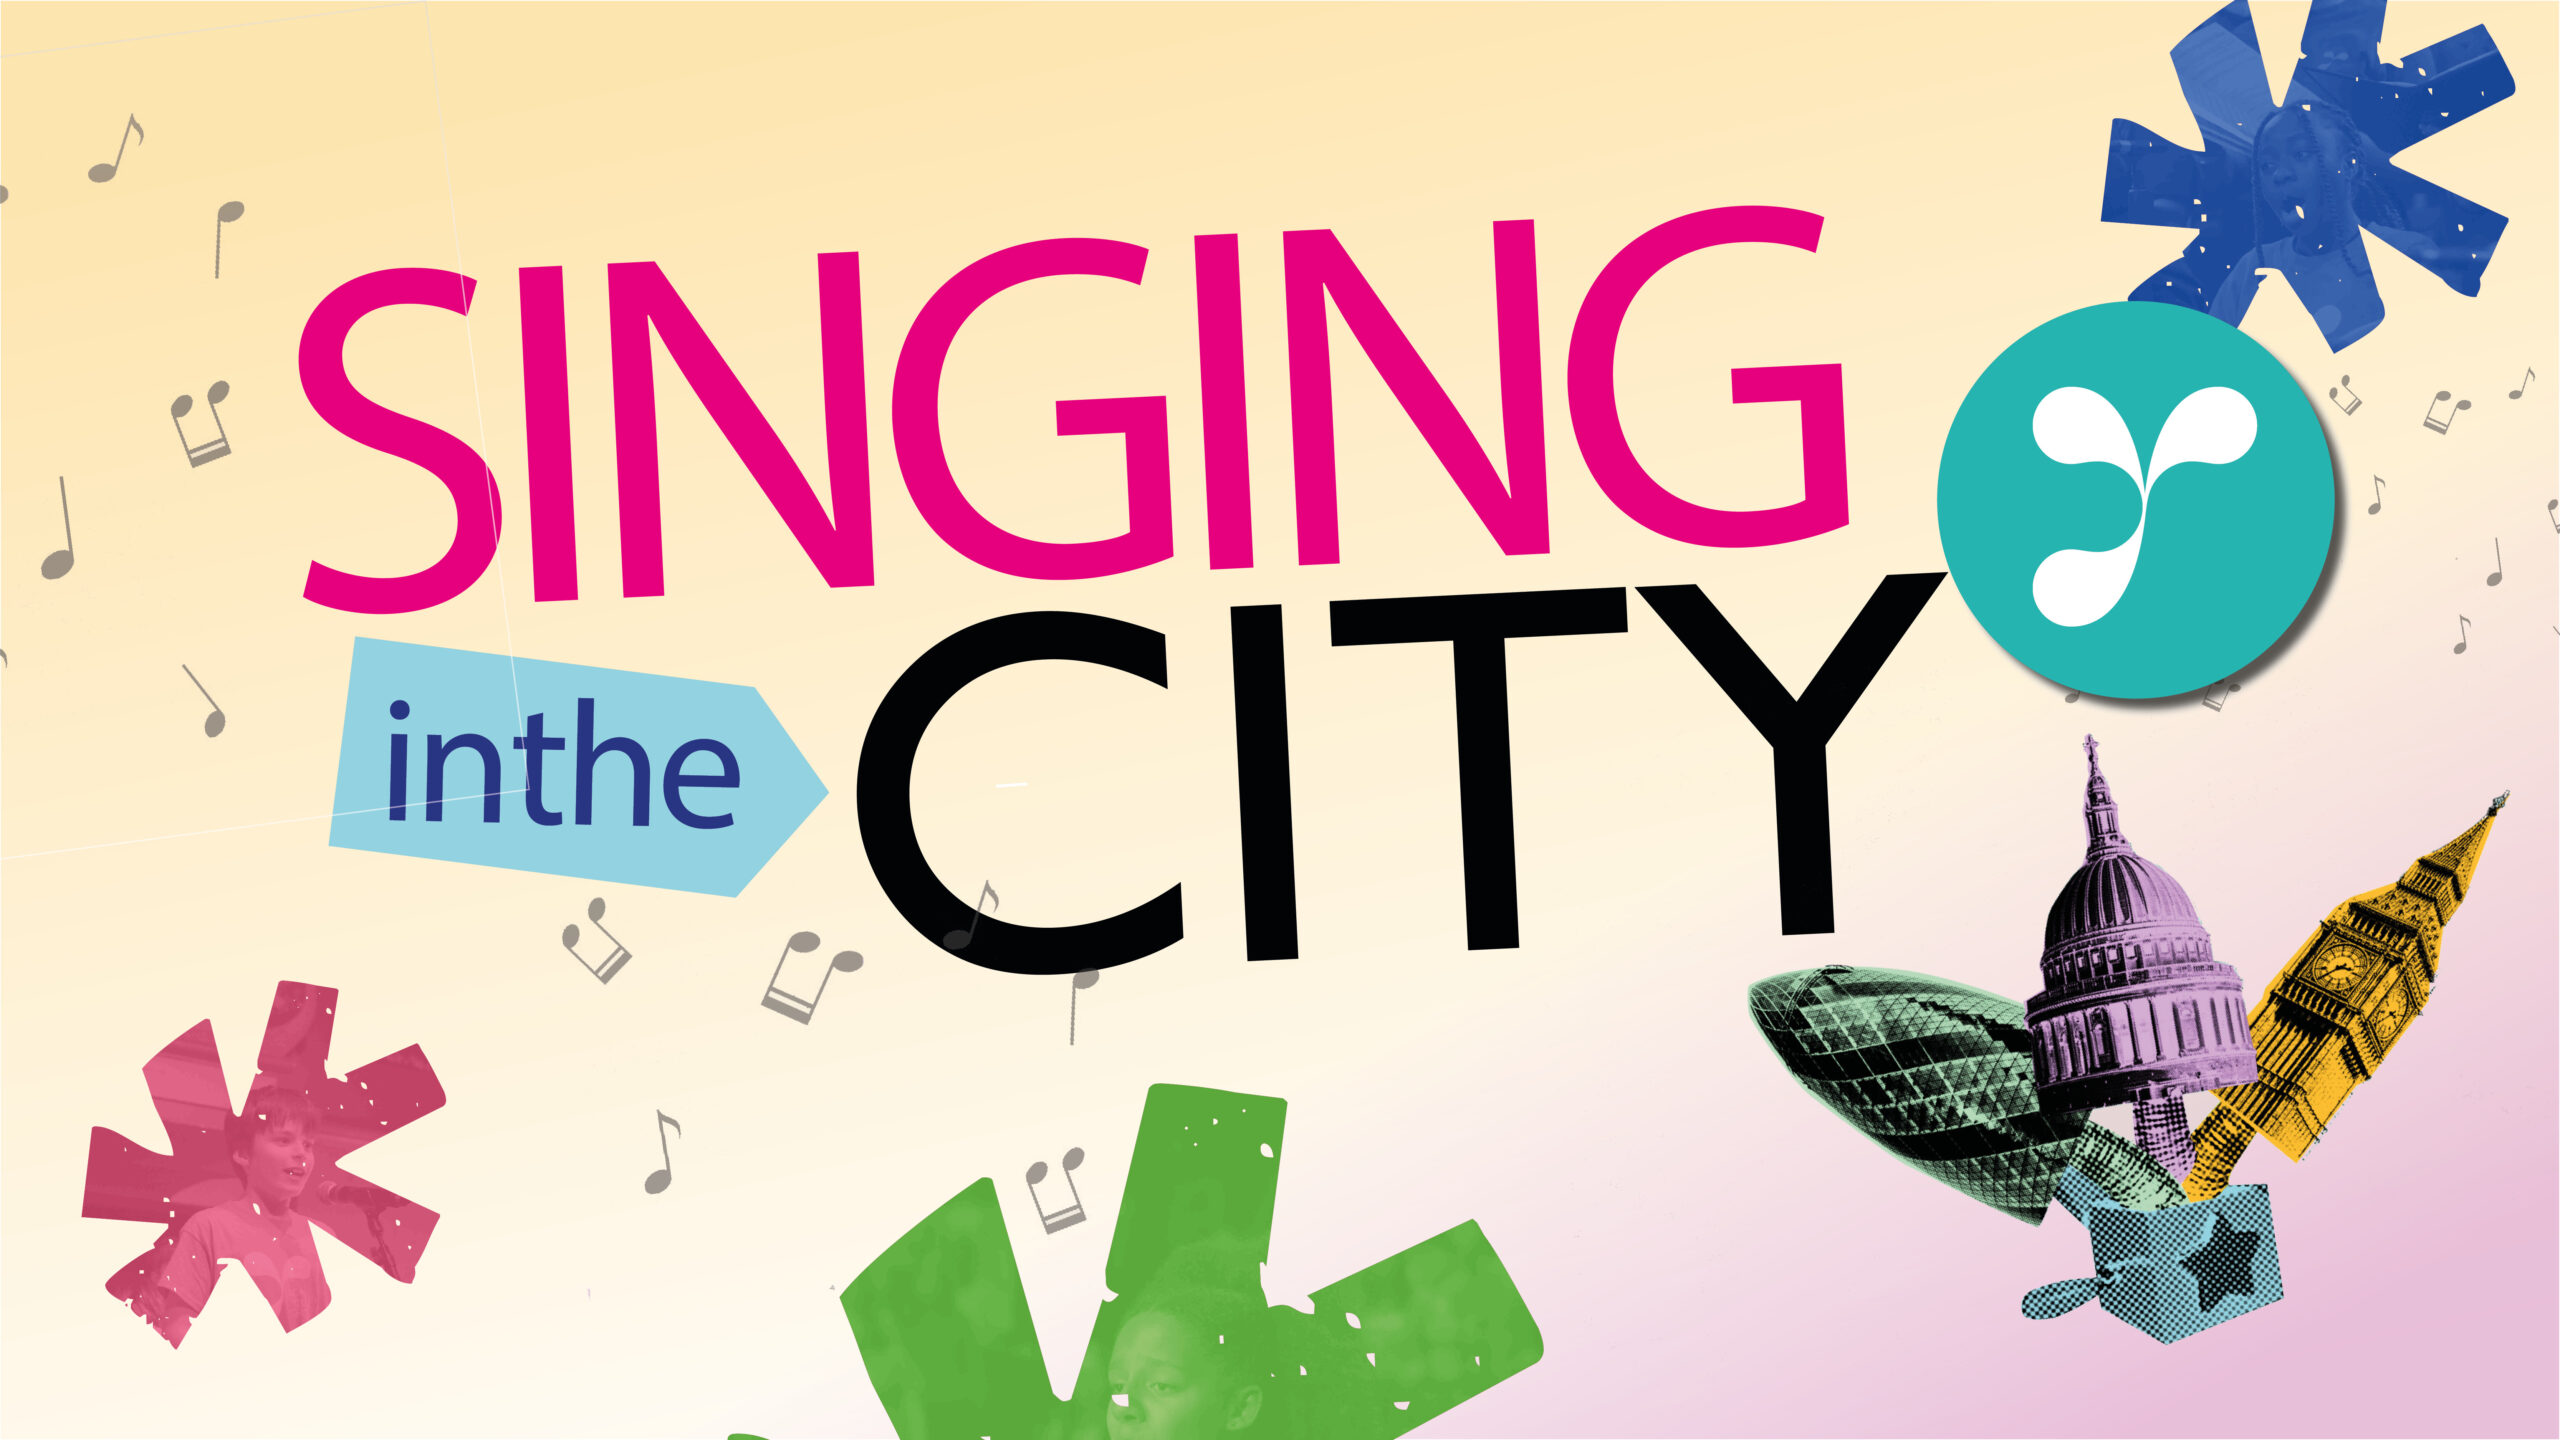 A beige/orange to pink gradient back ground, with the words 'Singing in the city' in the centre, an LYC logo, a jack-in-the-box with London landmarks popping out, and 3 abstract start shapes each with a picture of an LYC member singing into a microphone.